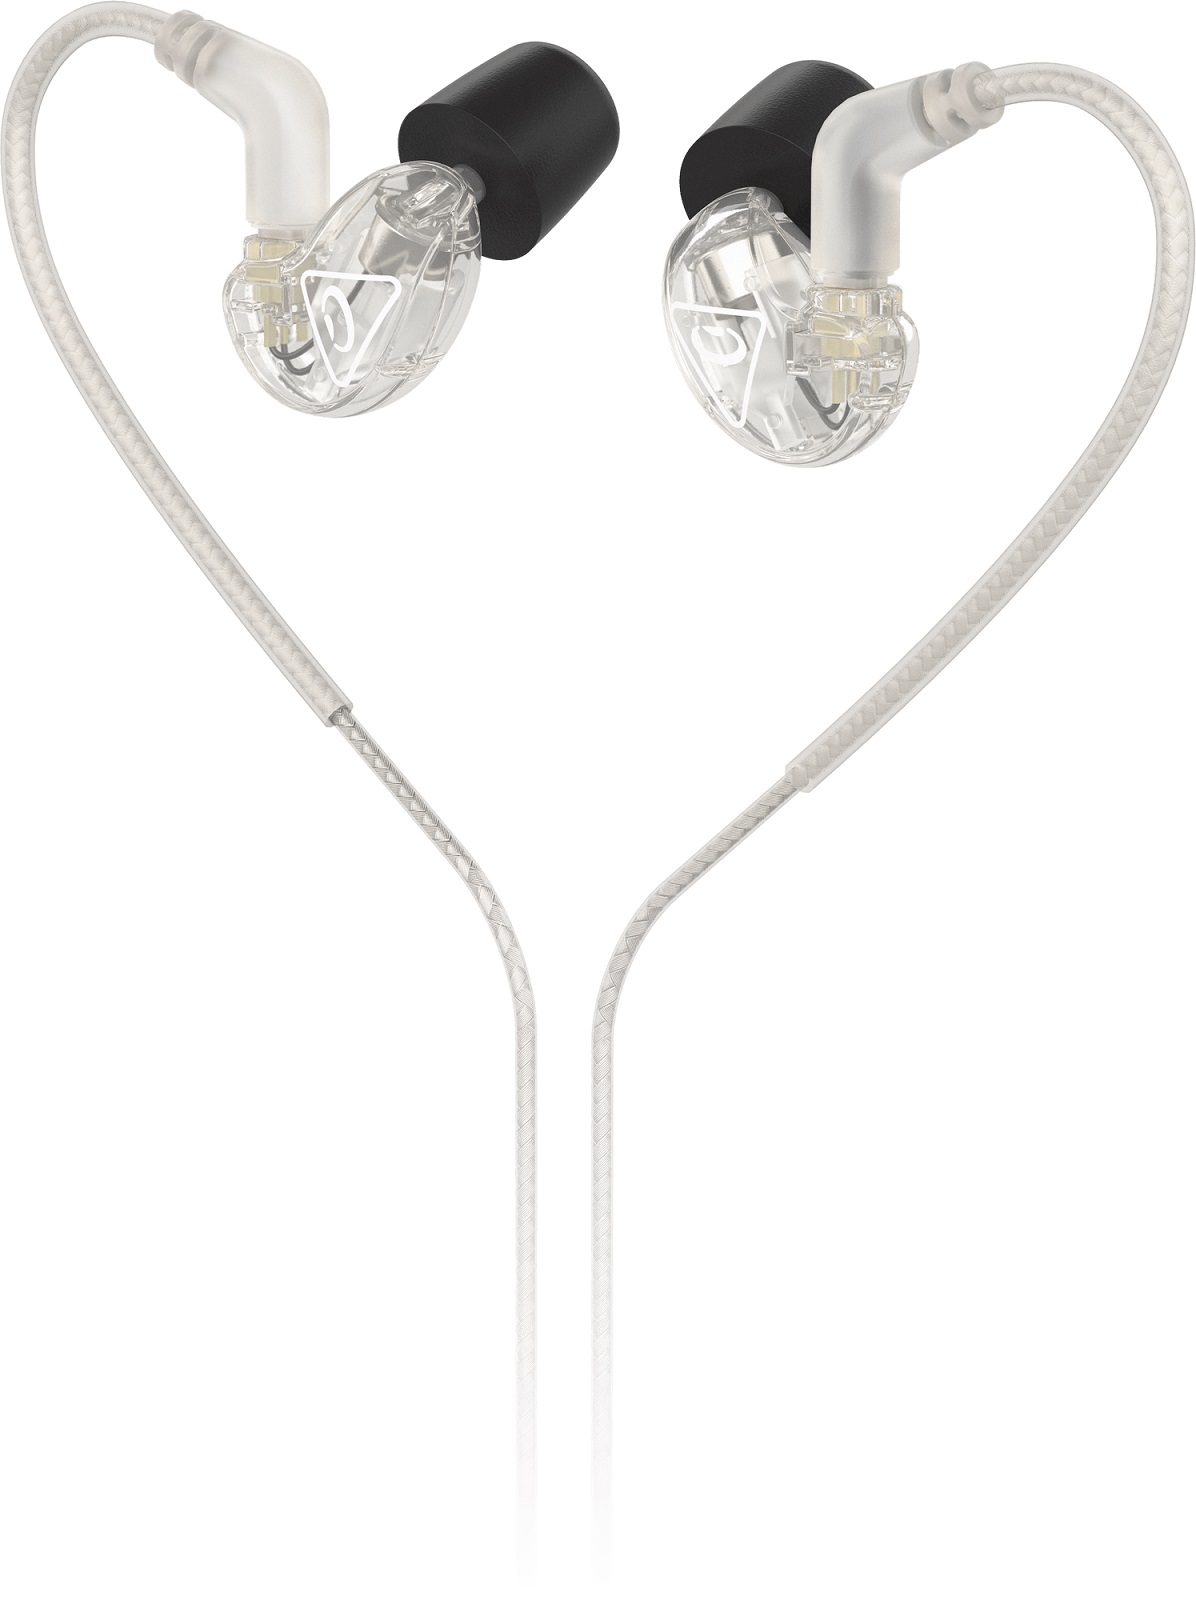 BEHRINGER SD251-CL AURICOLARE IN EAR MONITOR CLEAR TRASPARENTE 1